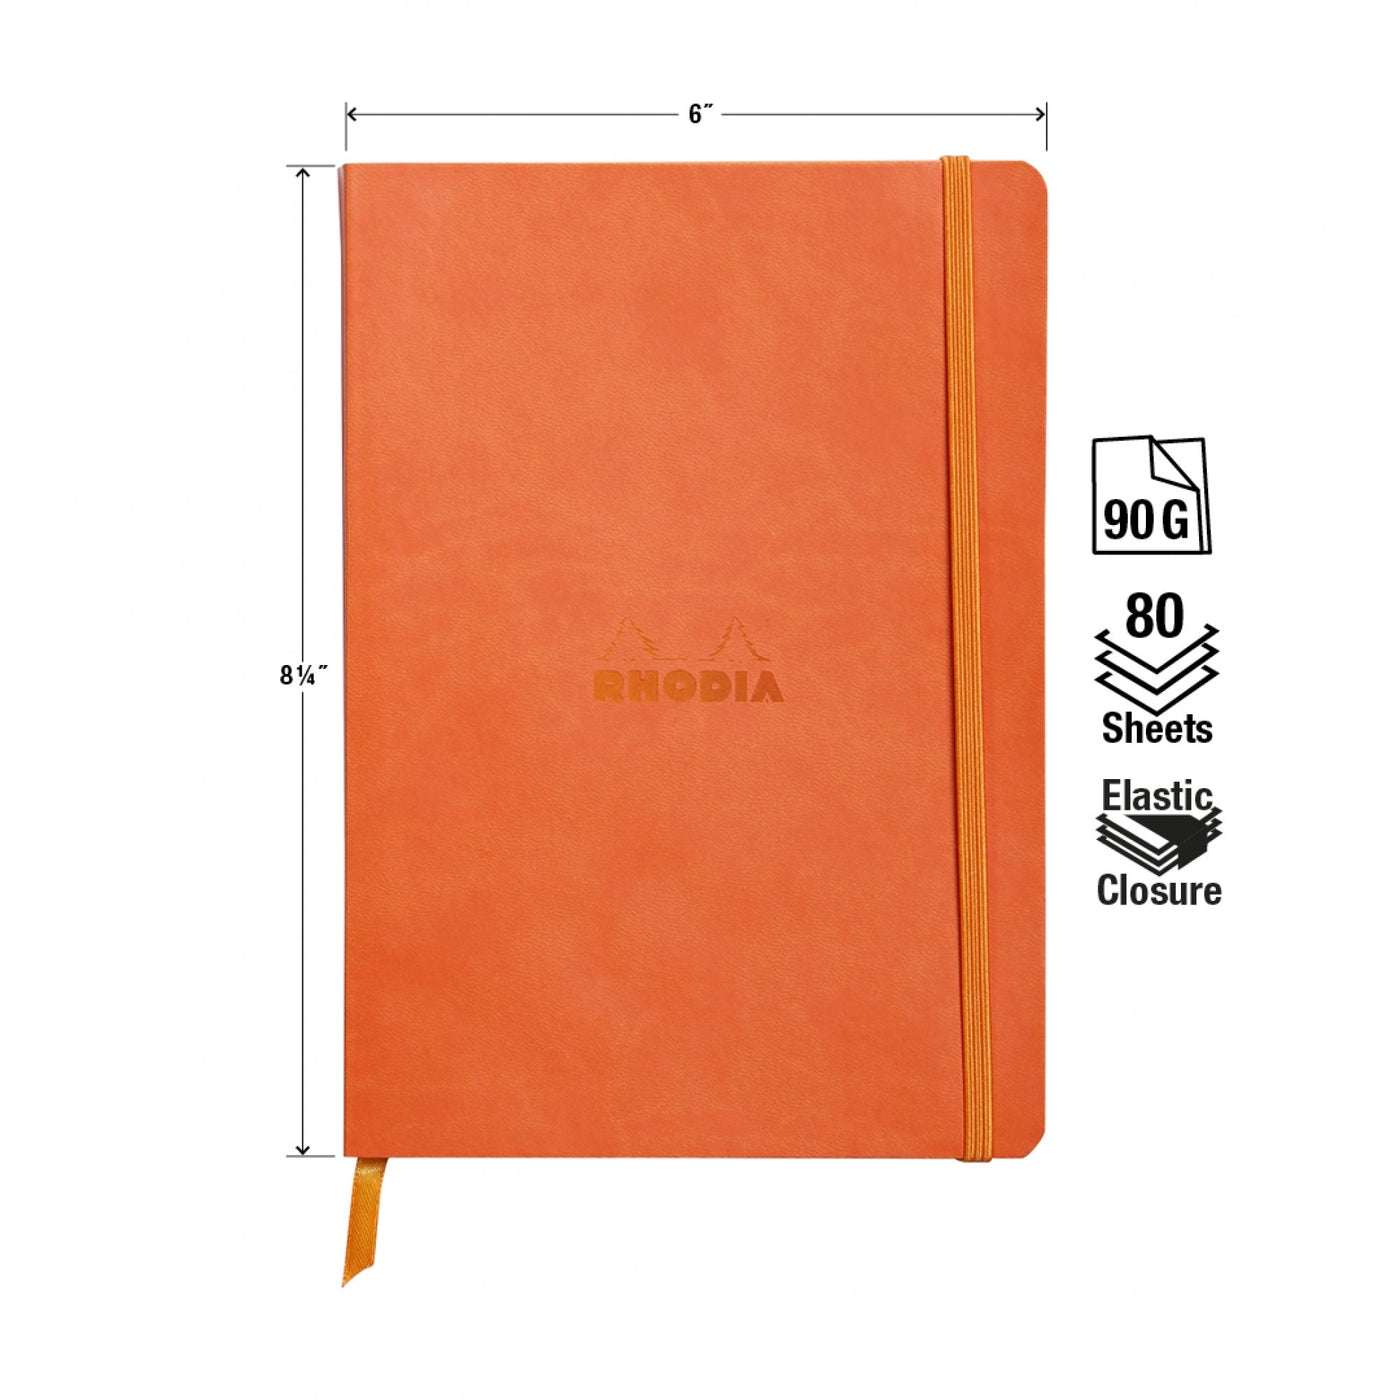 Rhodia Rhodiarama Soft Cover A5 Tangerine Lined Notebook Measurements